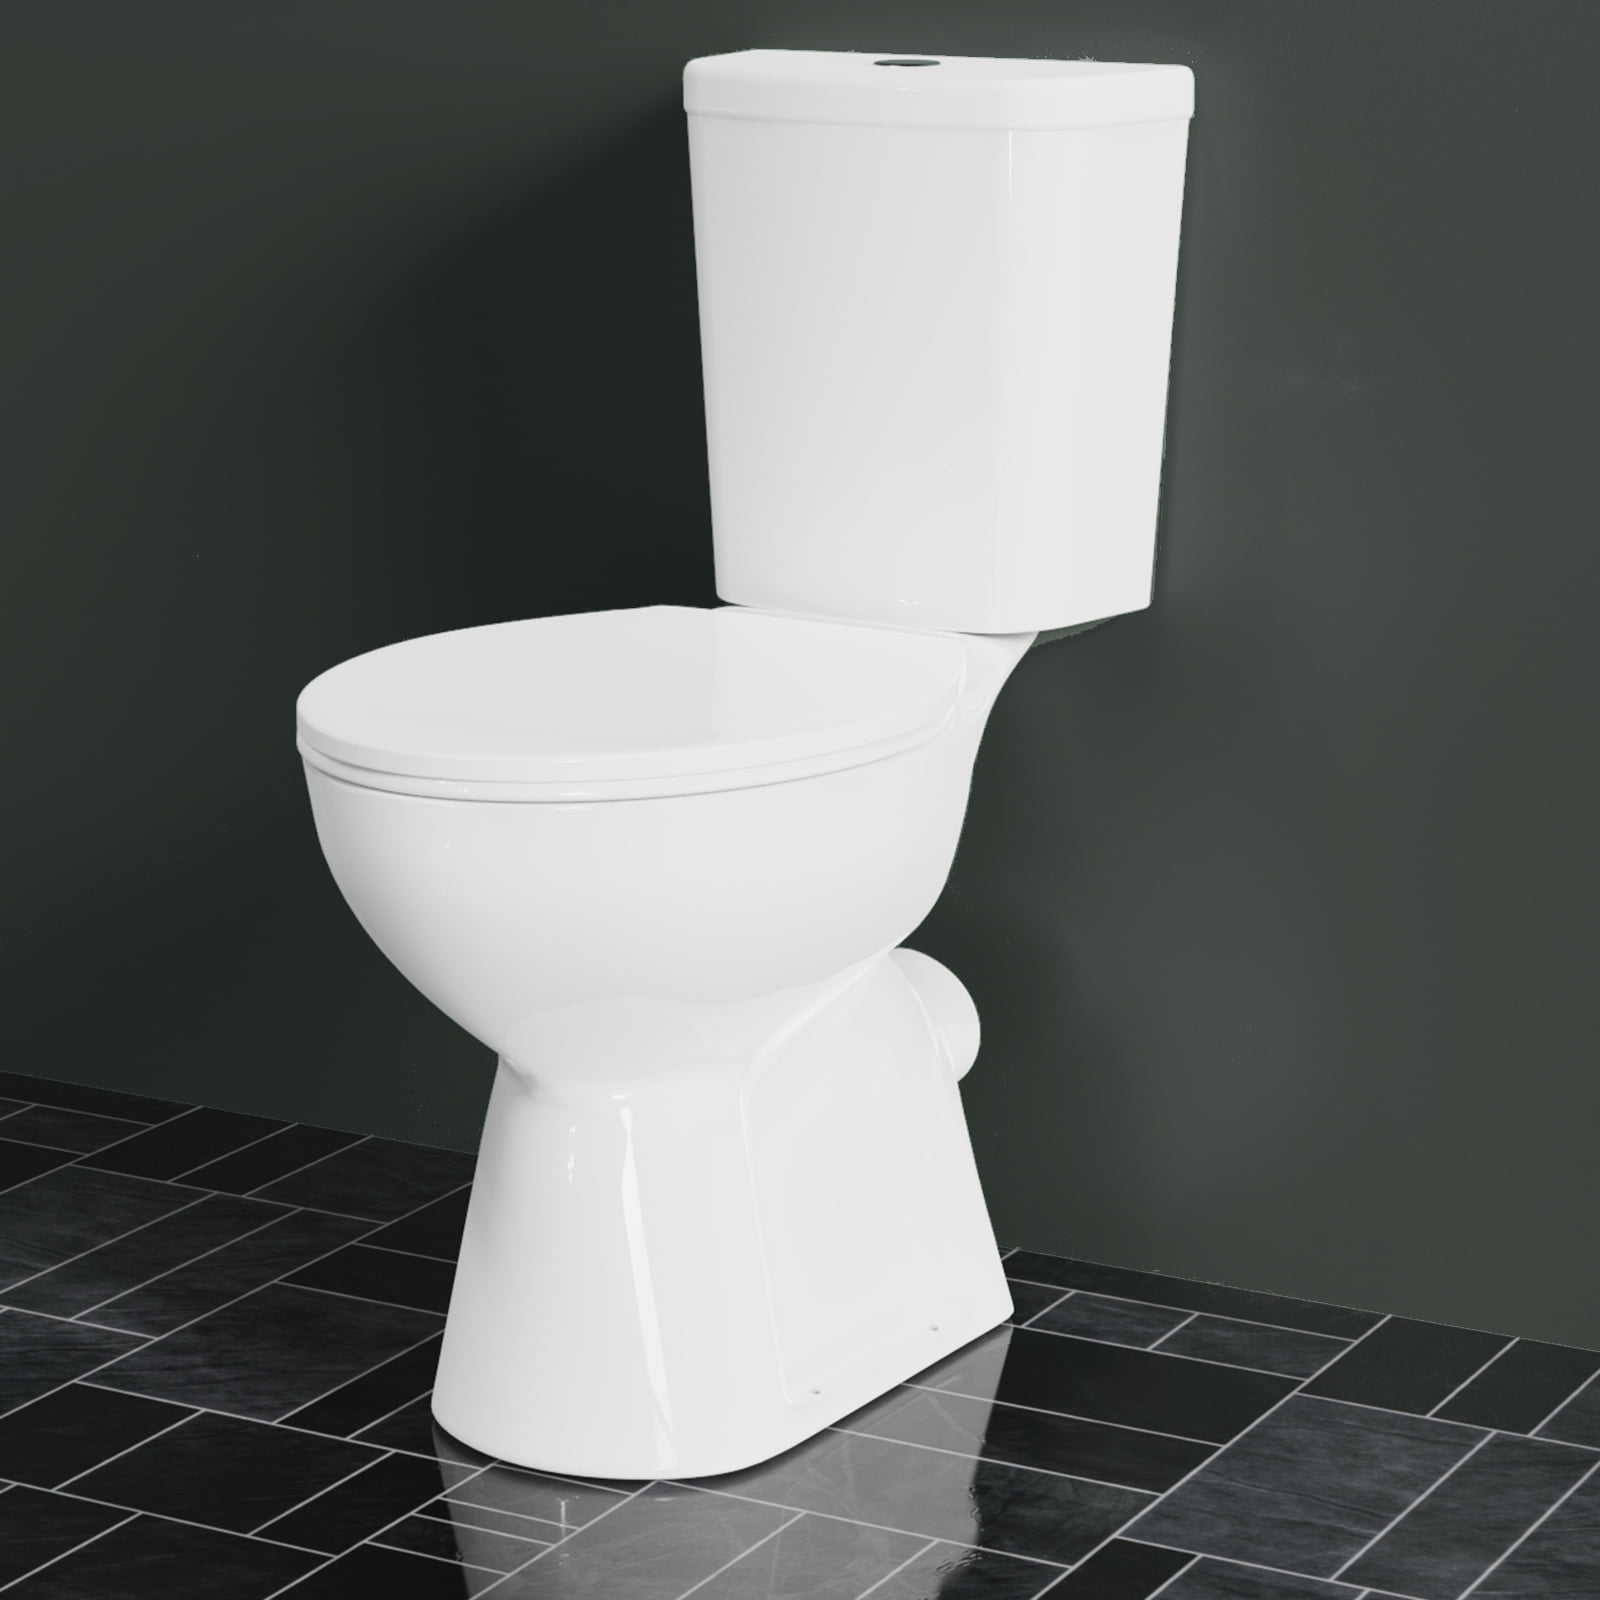 Reviews for Glacier Bay Power Flush 2-Piece 1.28 Gallons Per Flush GPF  Single Flush Round Toilet in White with Slow-Close Seat Included